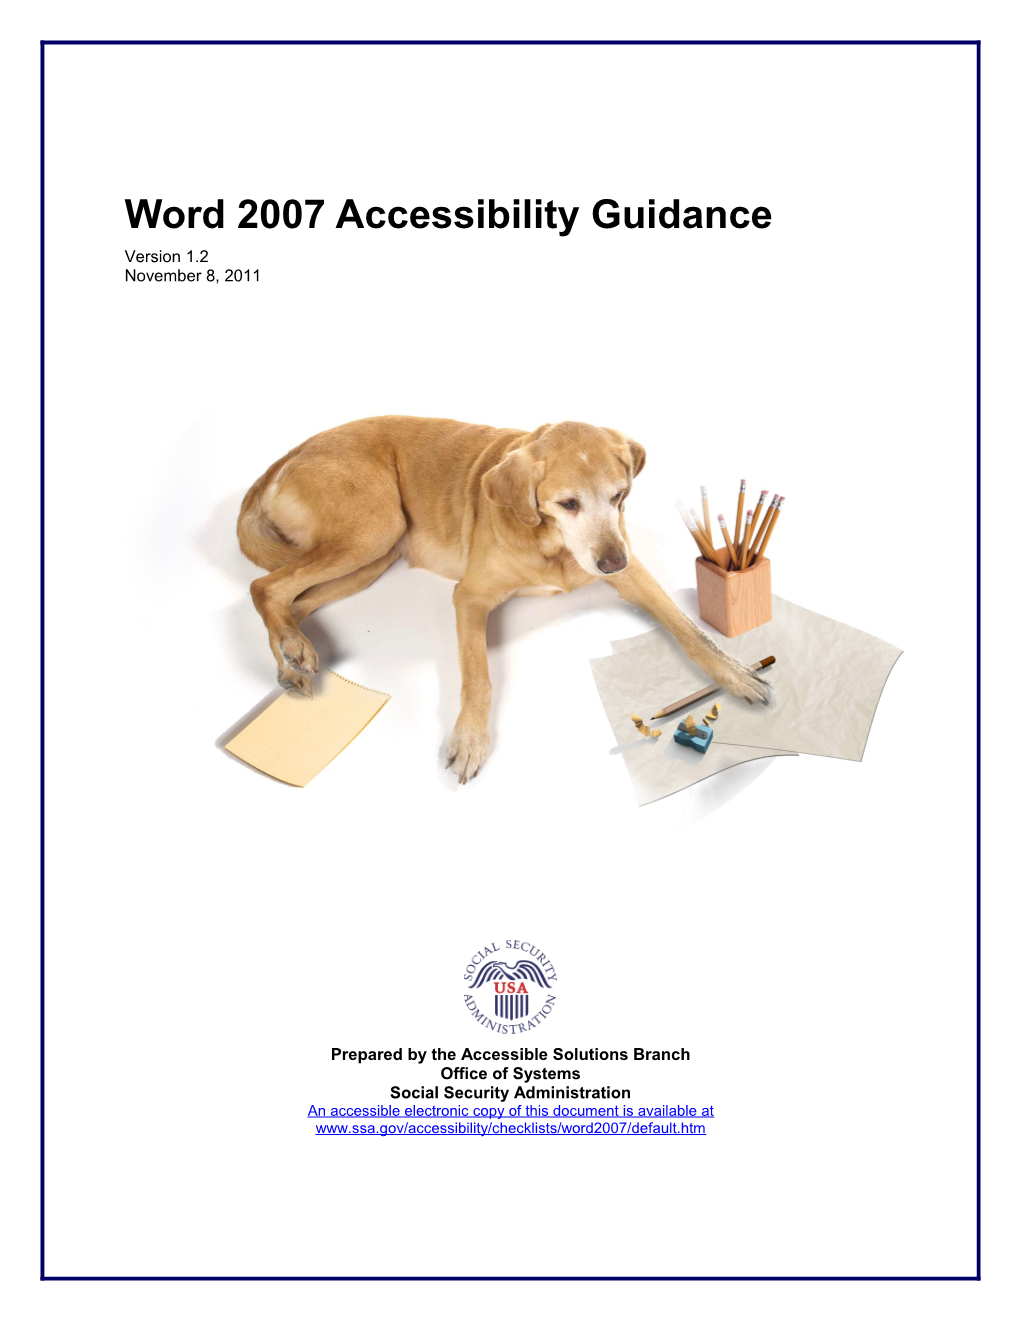 Word 2007 Accessibility Guidance